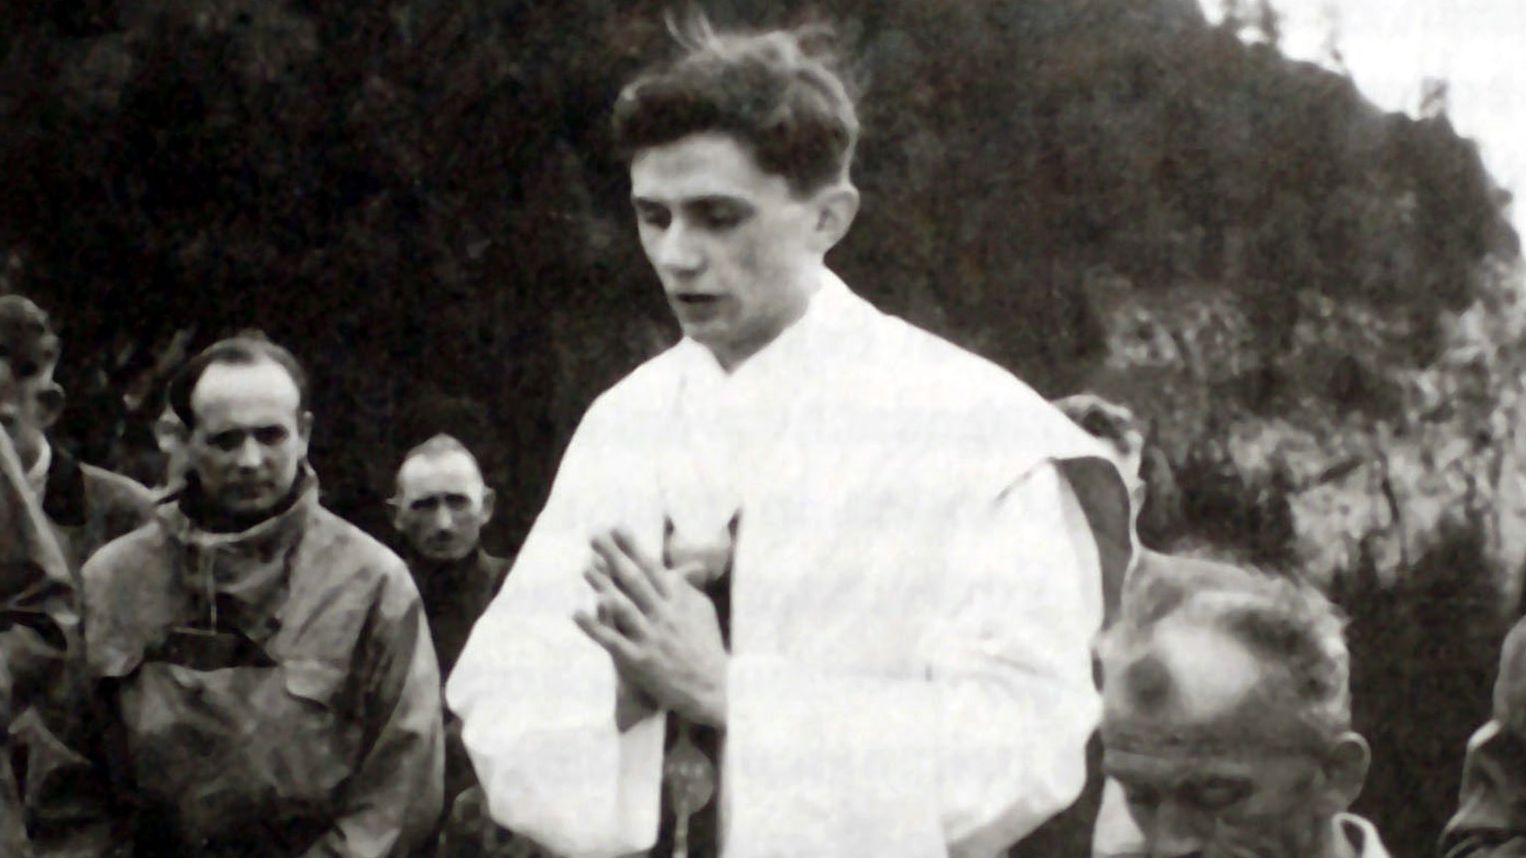 Benedict, center, prays during an open-air Mass near Ruhpolding, Germany, in 1952. He was ordained as a priest in 1951.